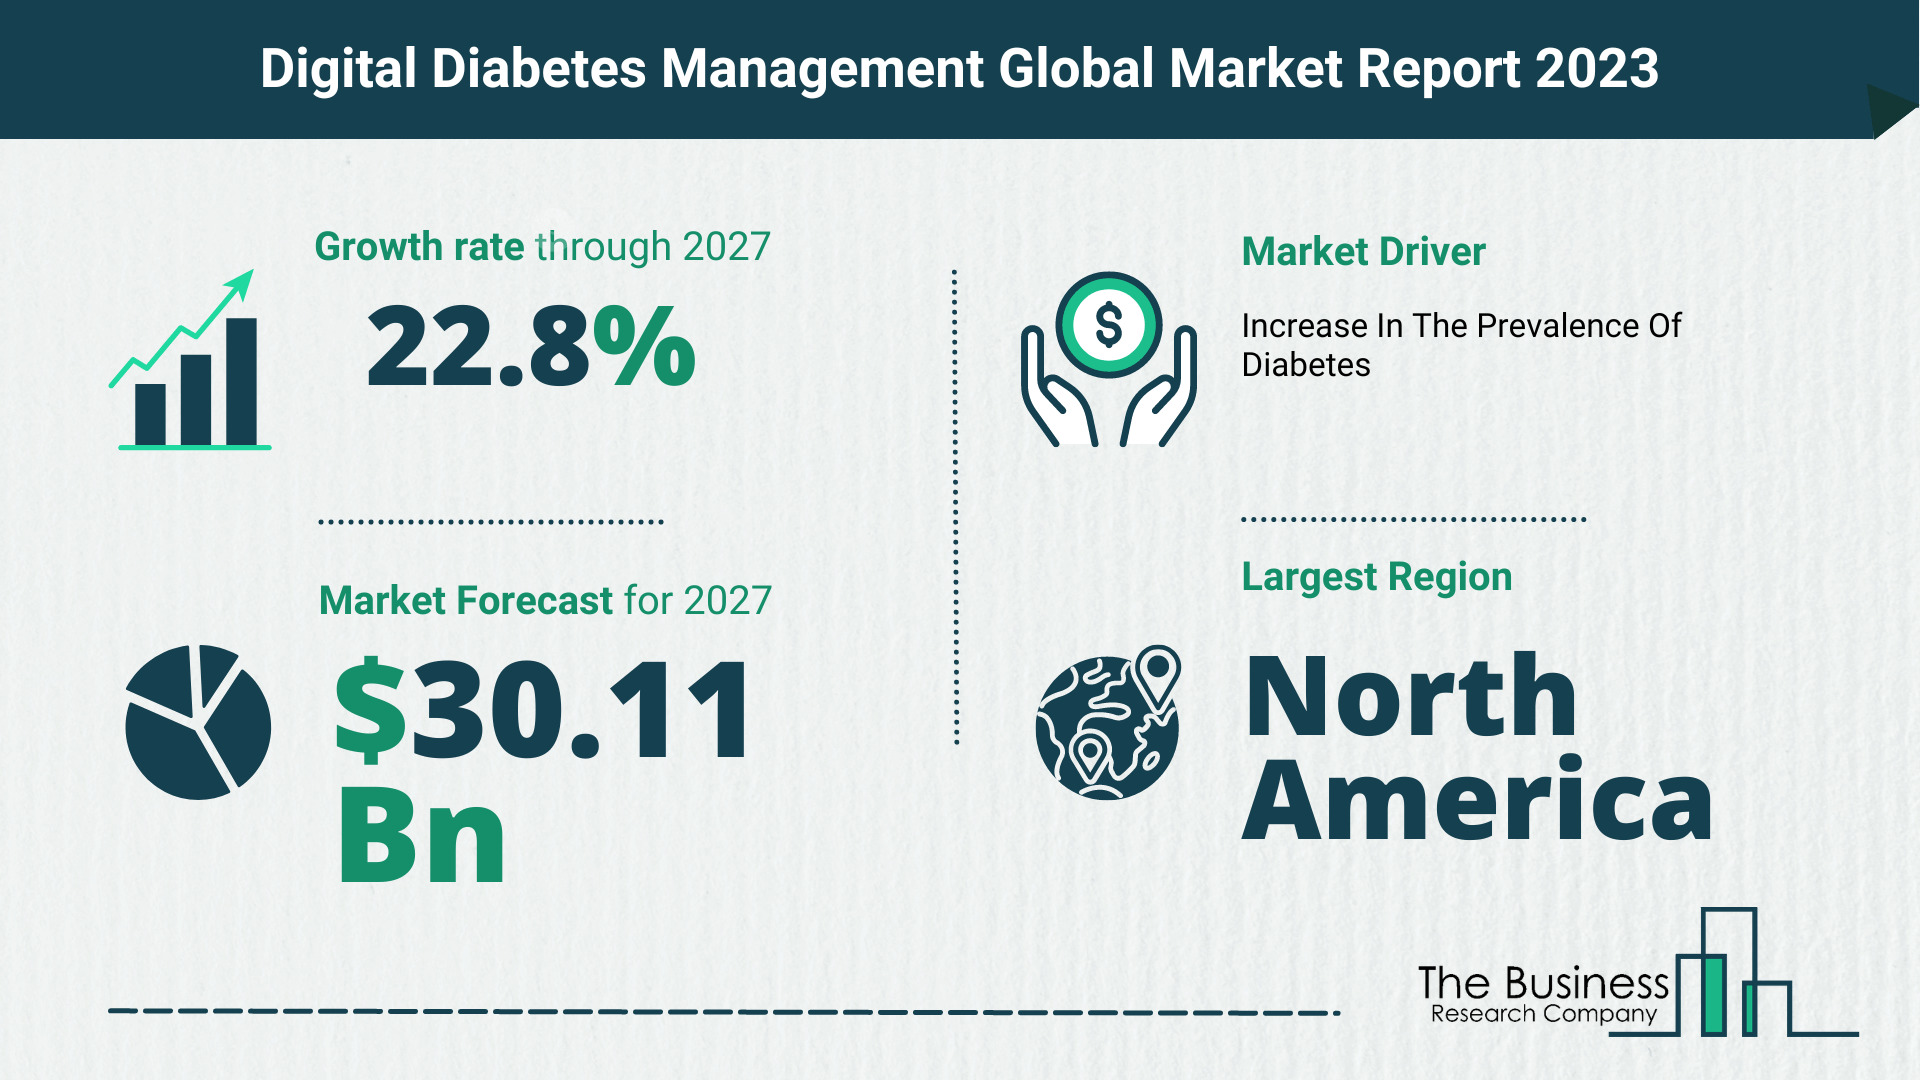 Digital Diabetes Management Market Size, Share, And Growth Rate Analysis 2023